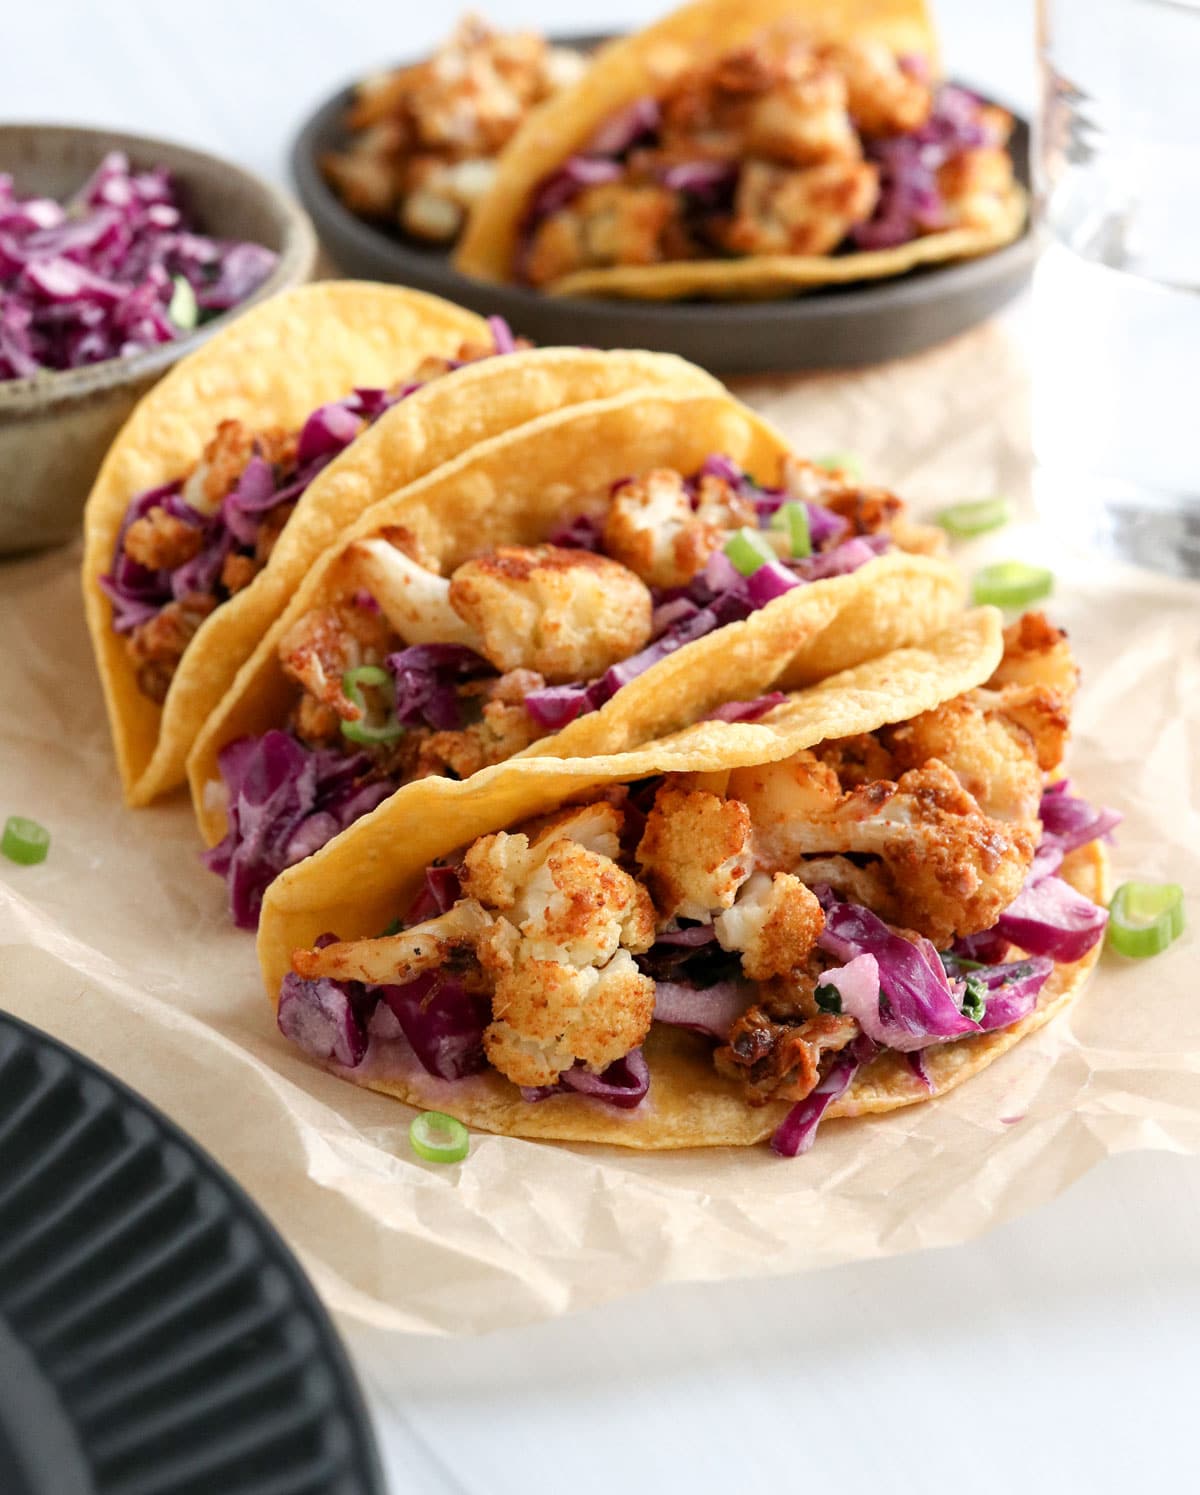 cauliflower tacos served with cabbage slaw in corn tortillas